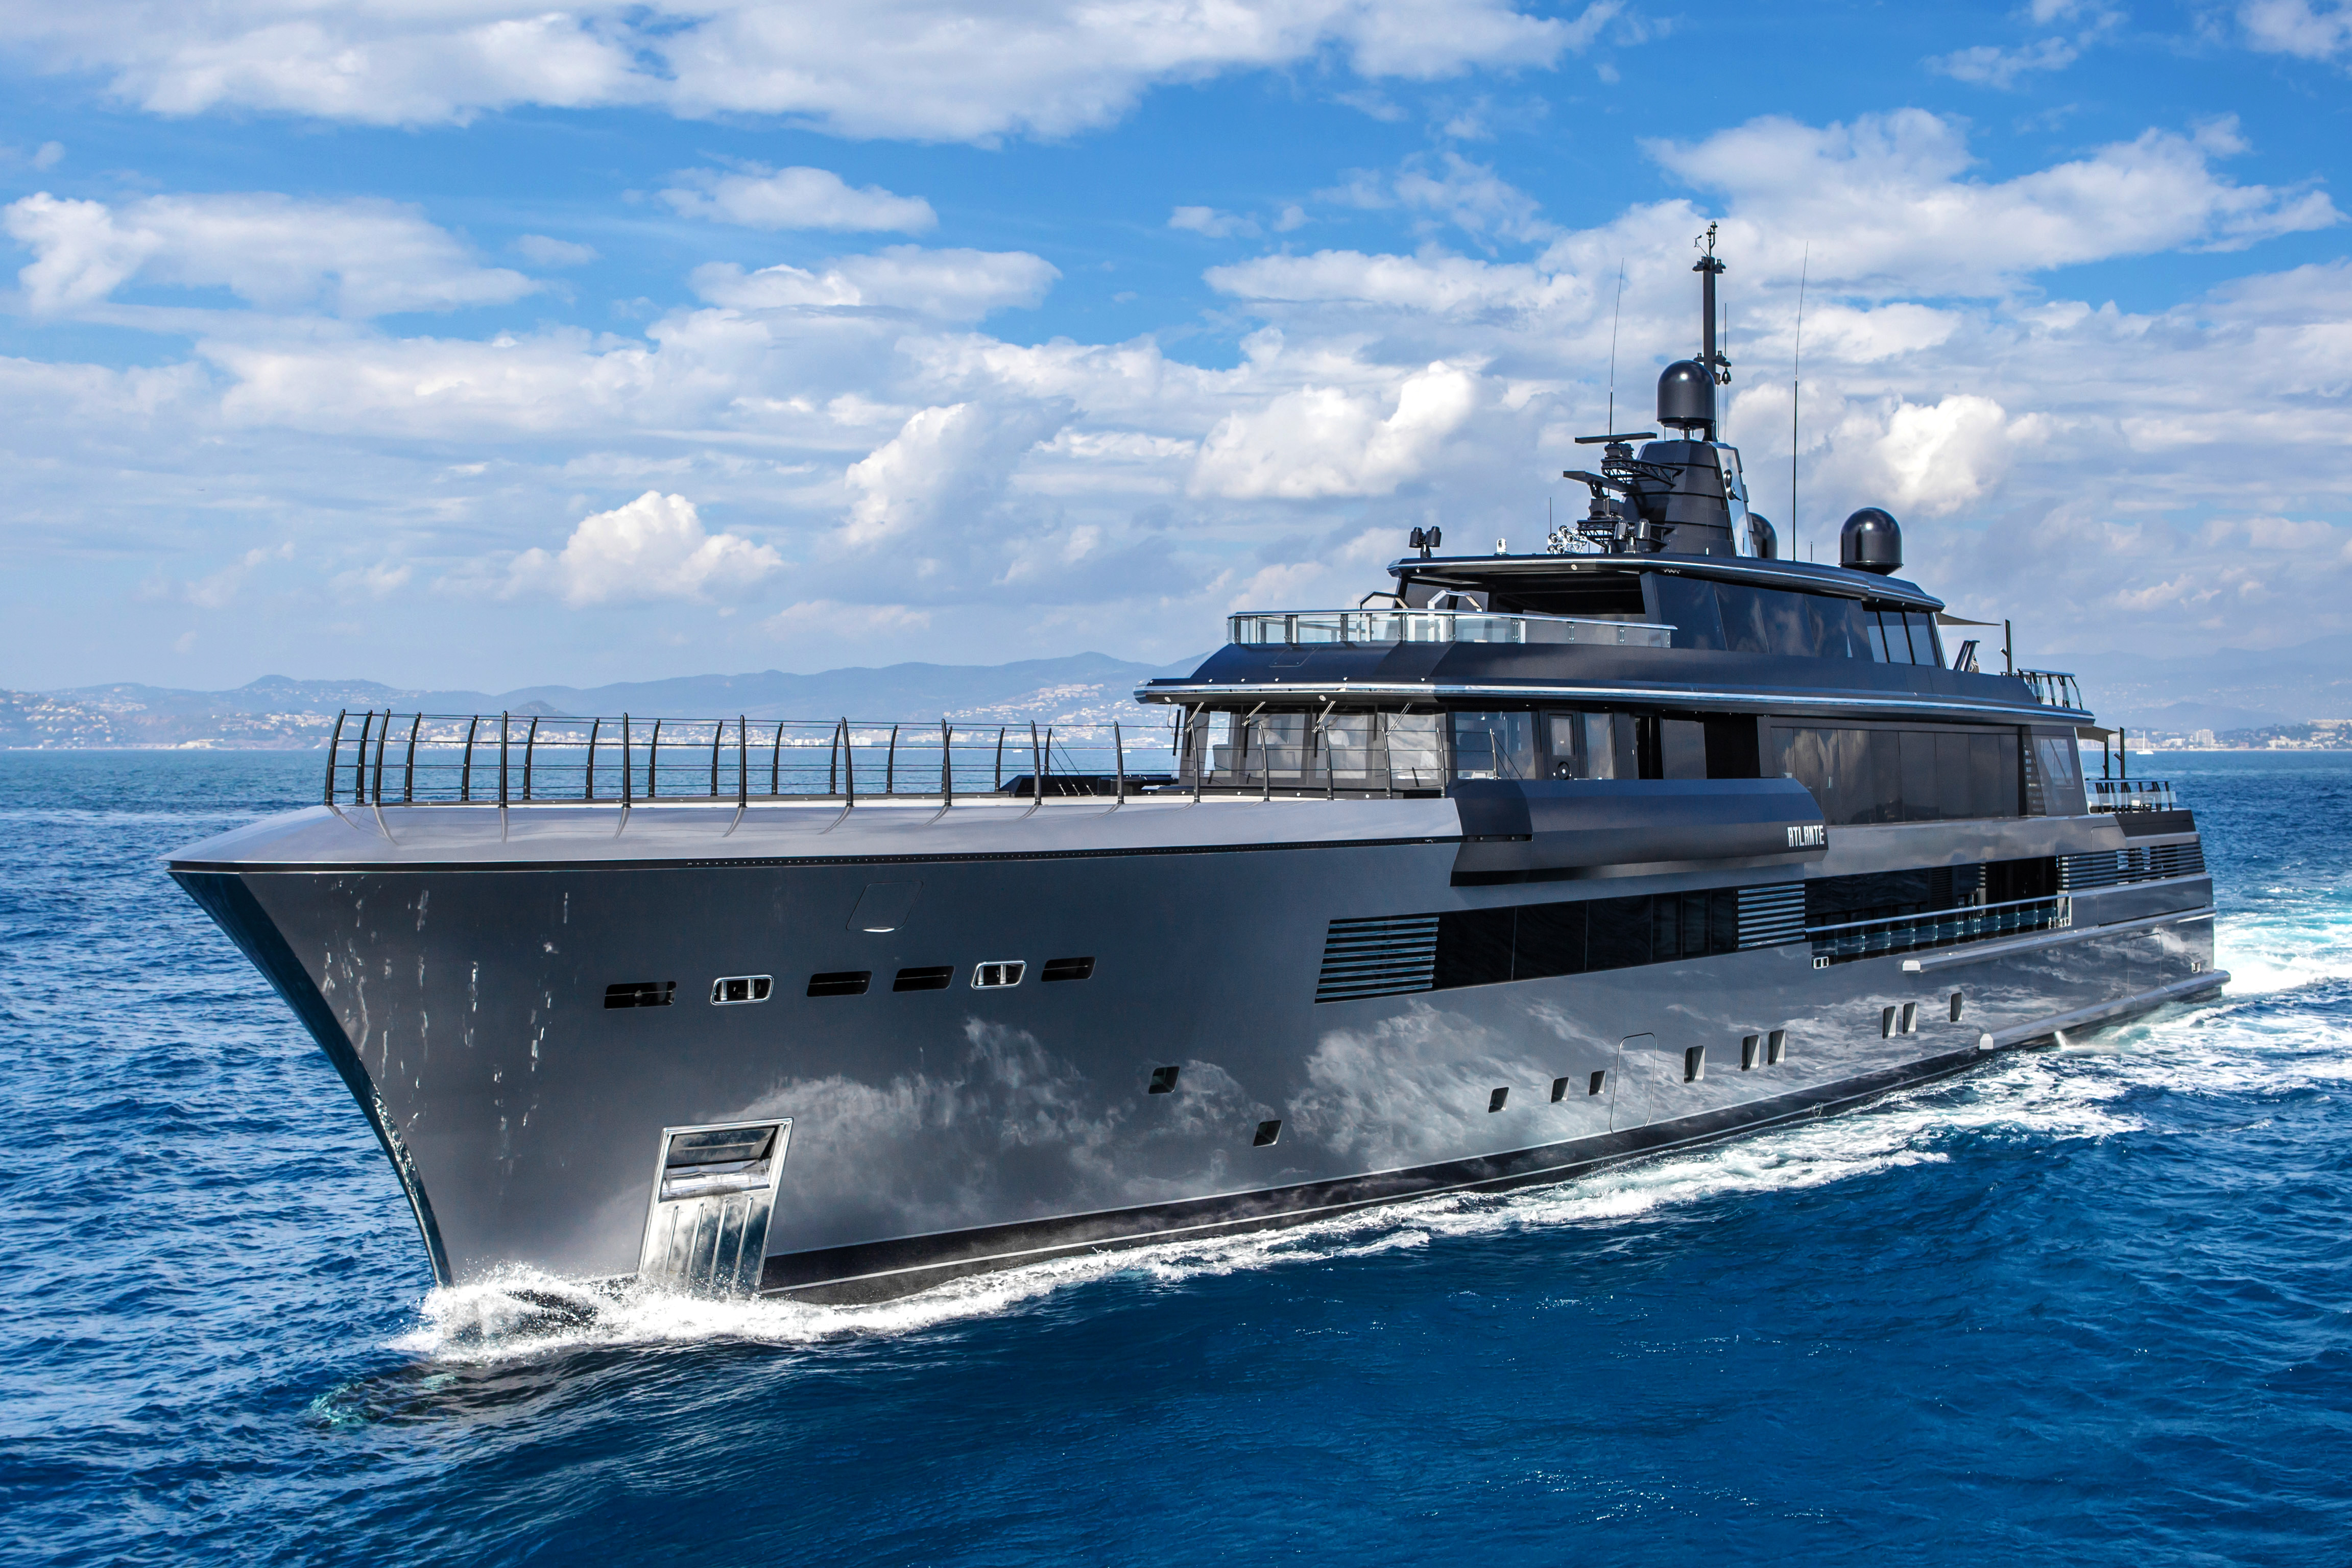 crn yachts price